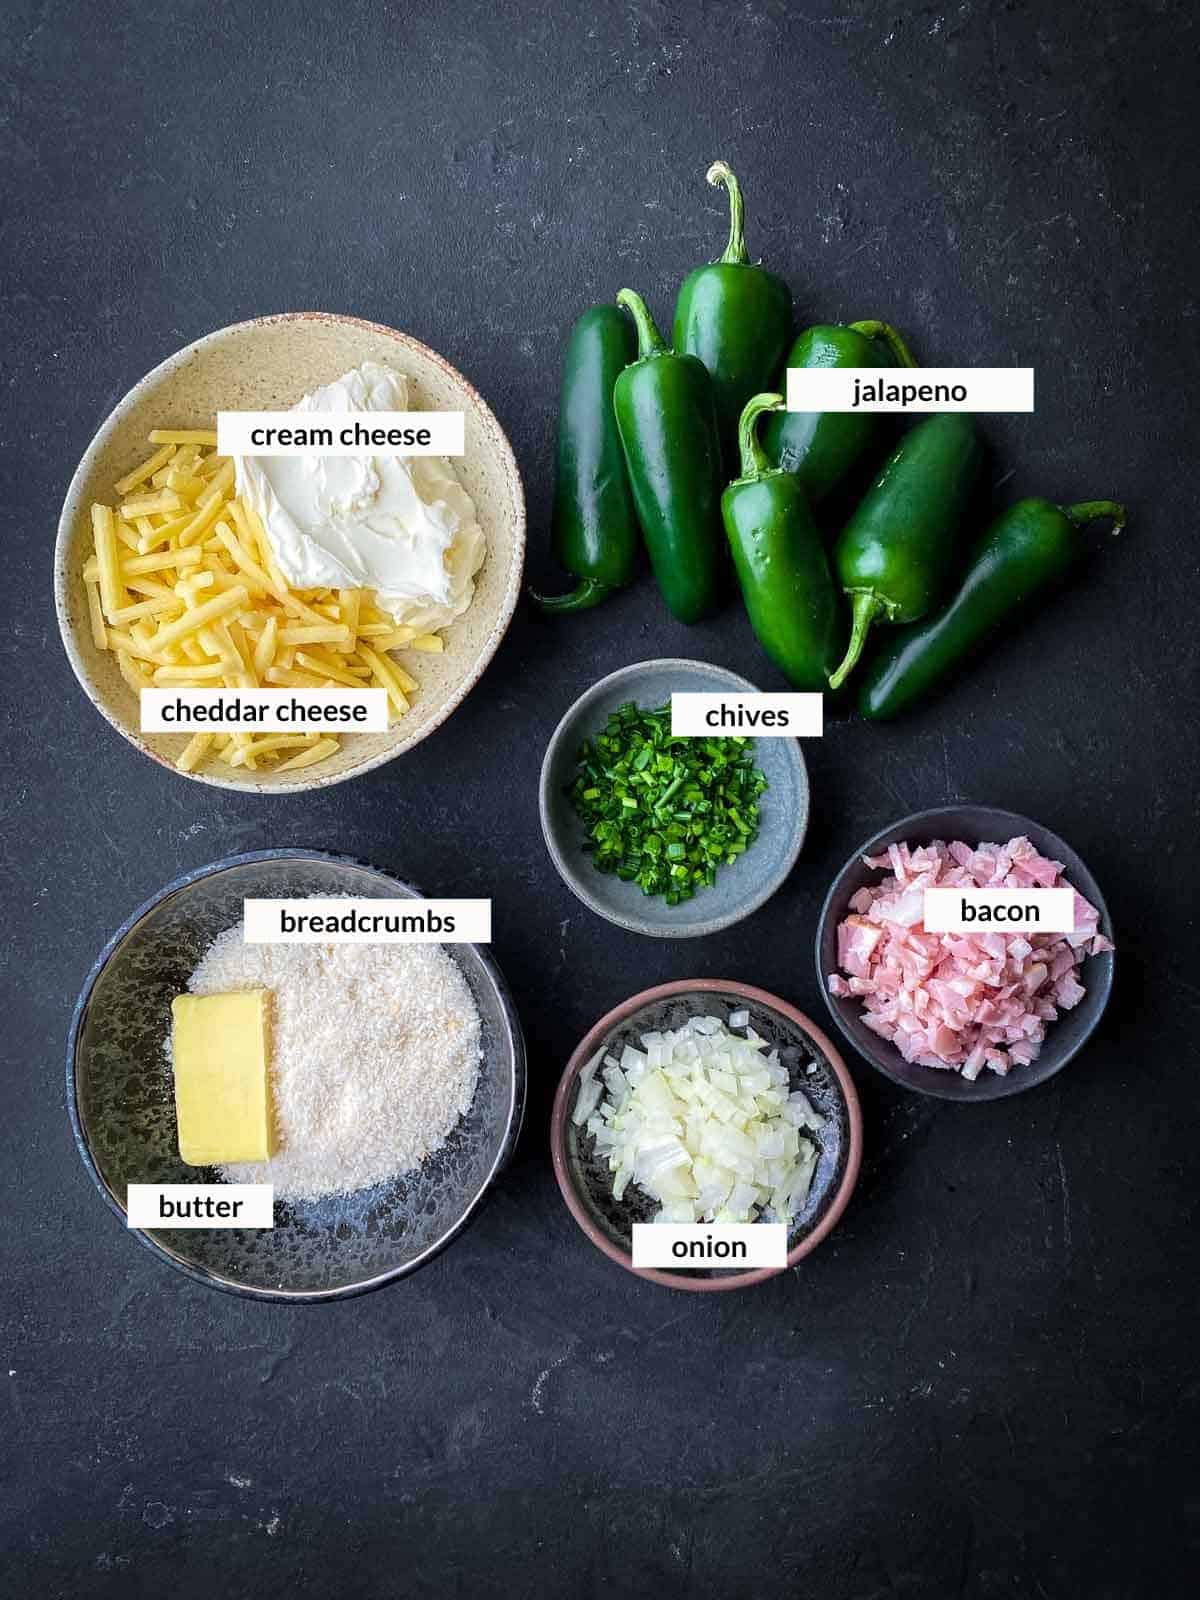 Individually labelled ingredients for Air Fryer Jalapeno Poppers